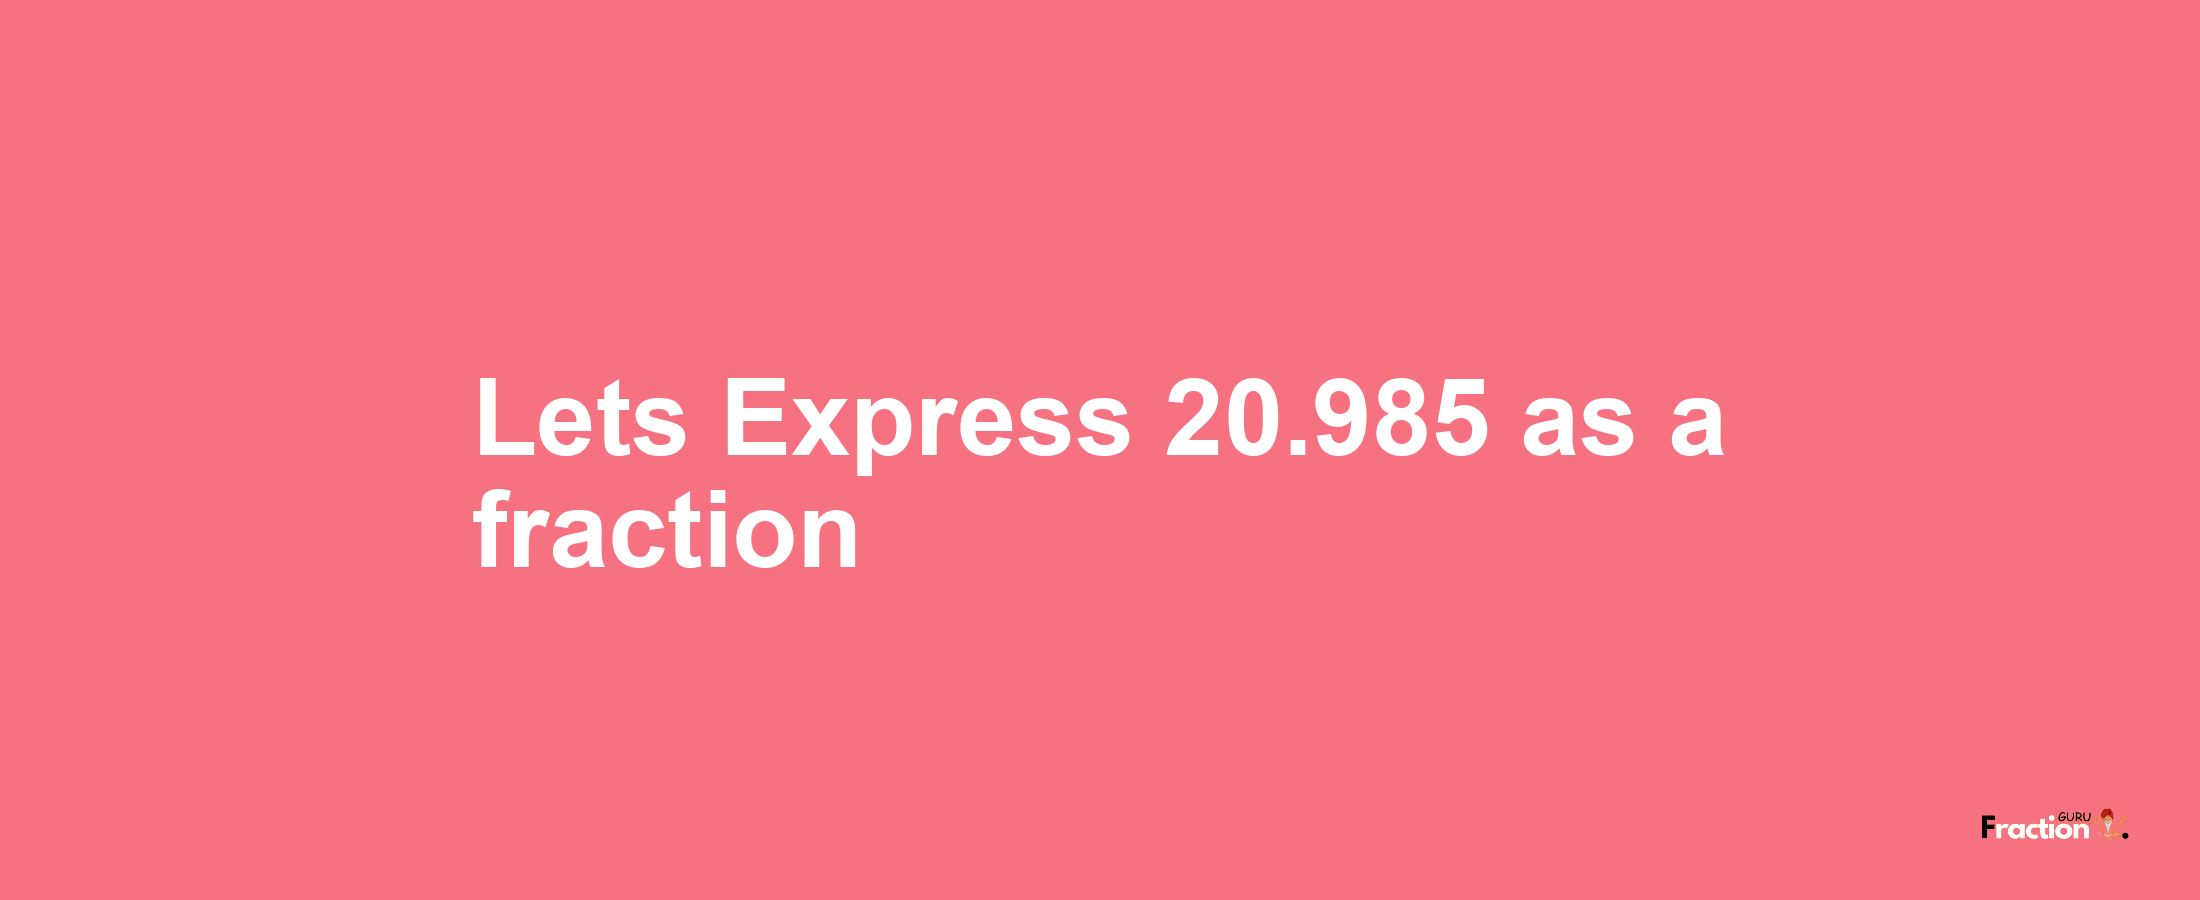 Lets Express 20.985 as afraction